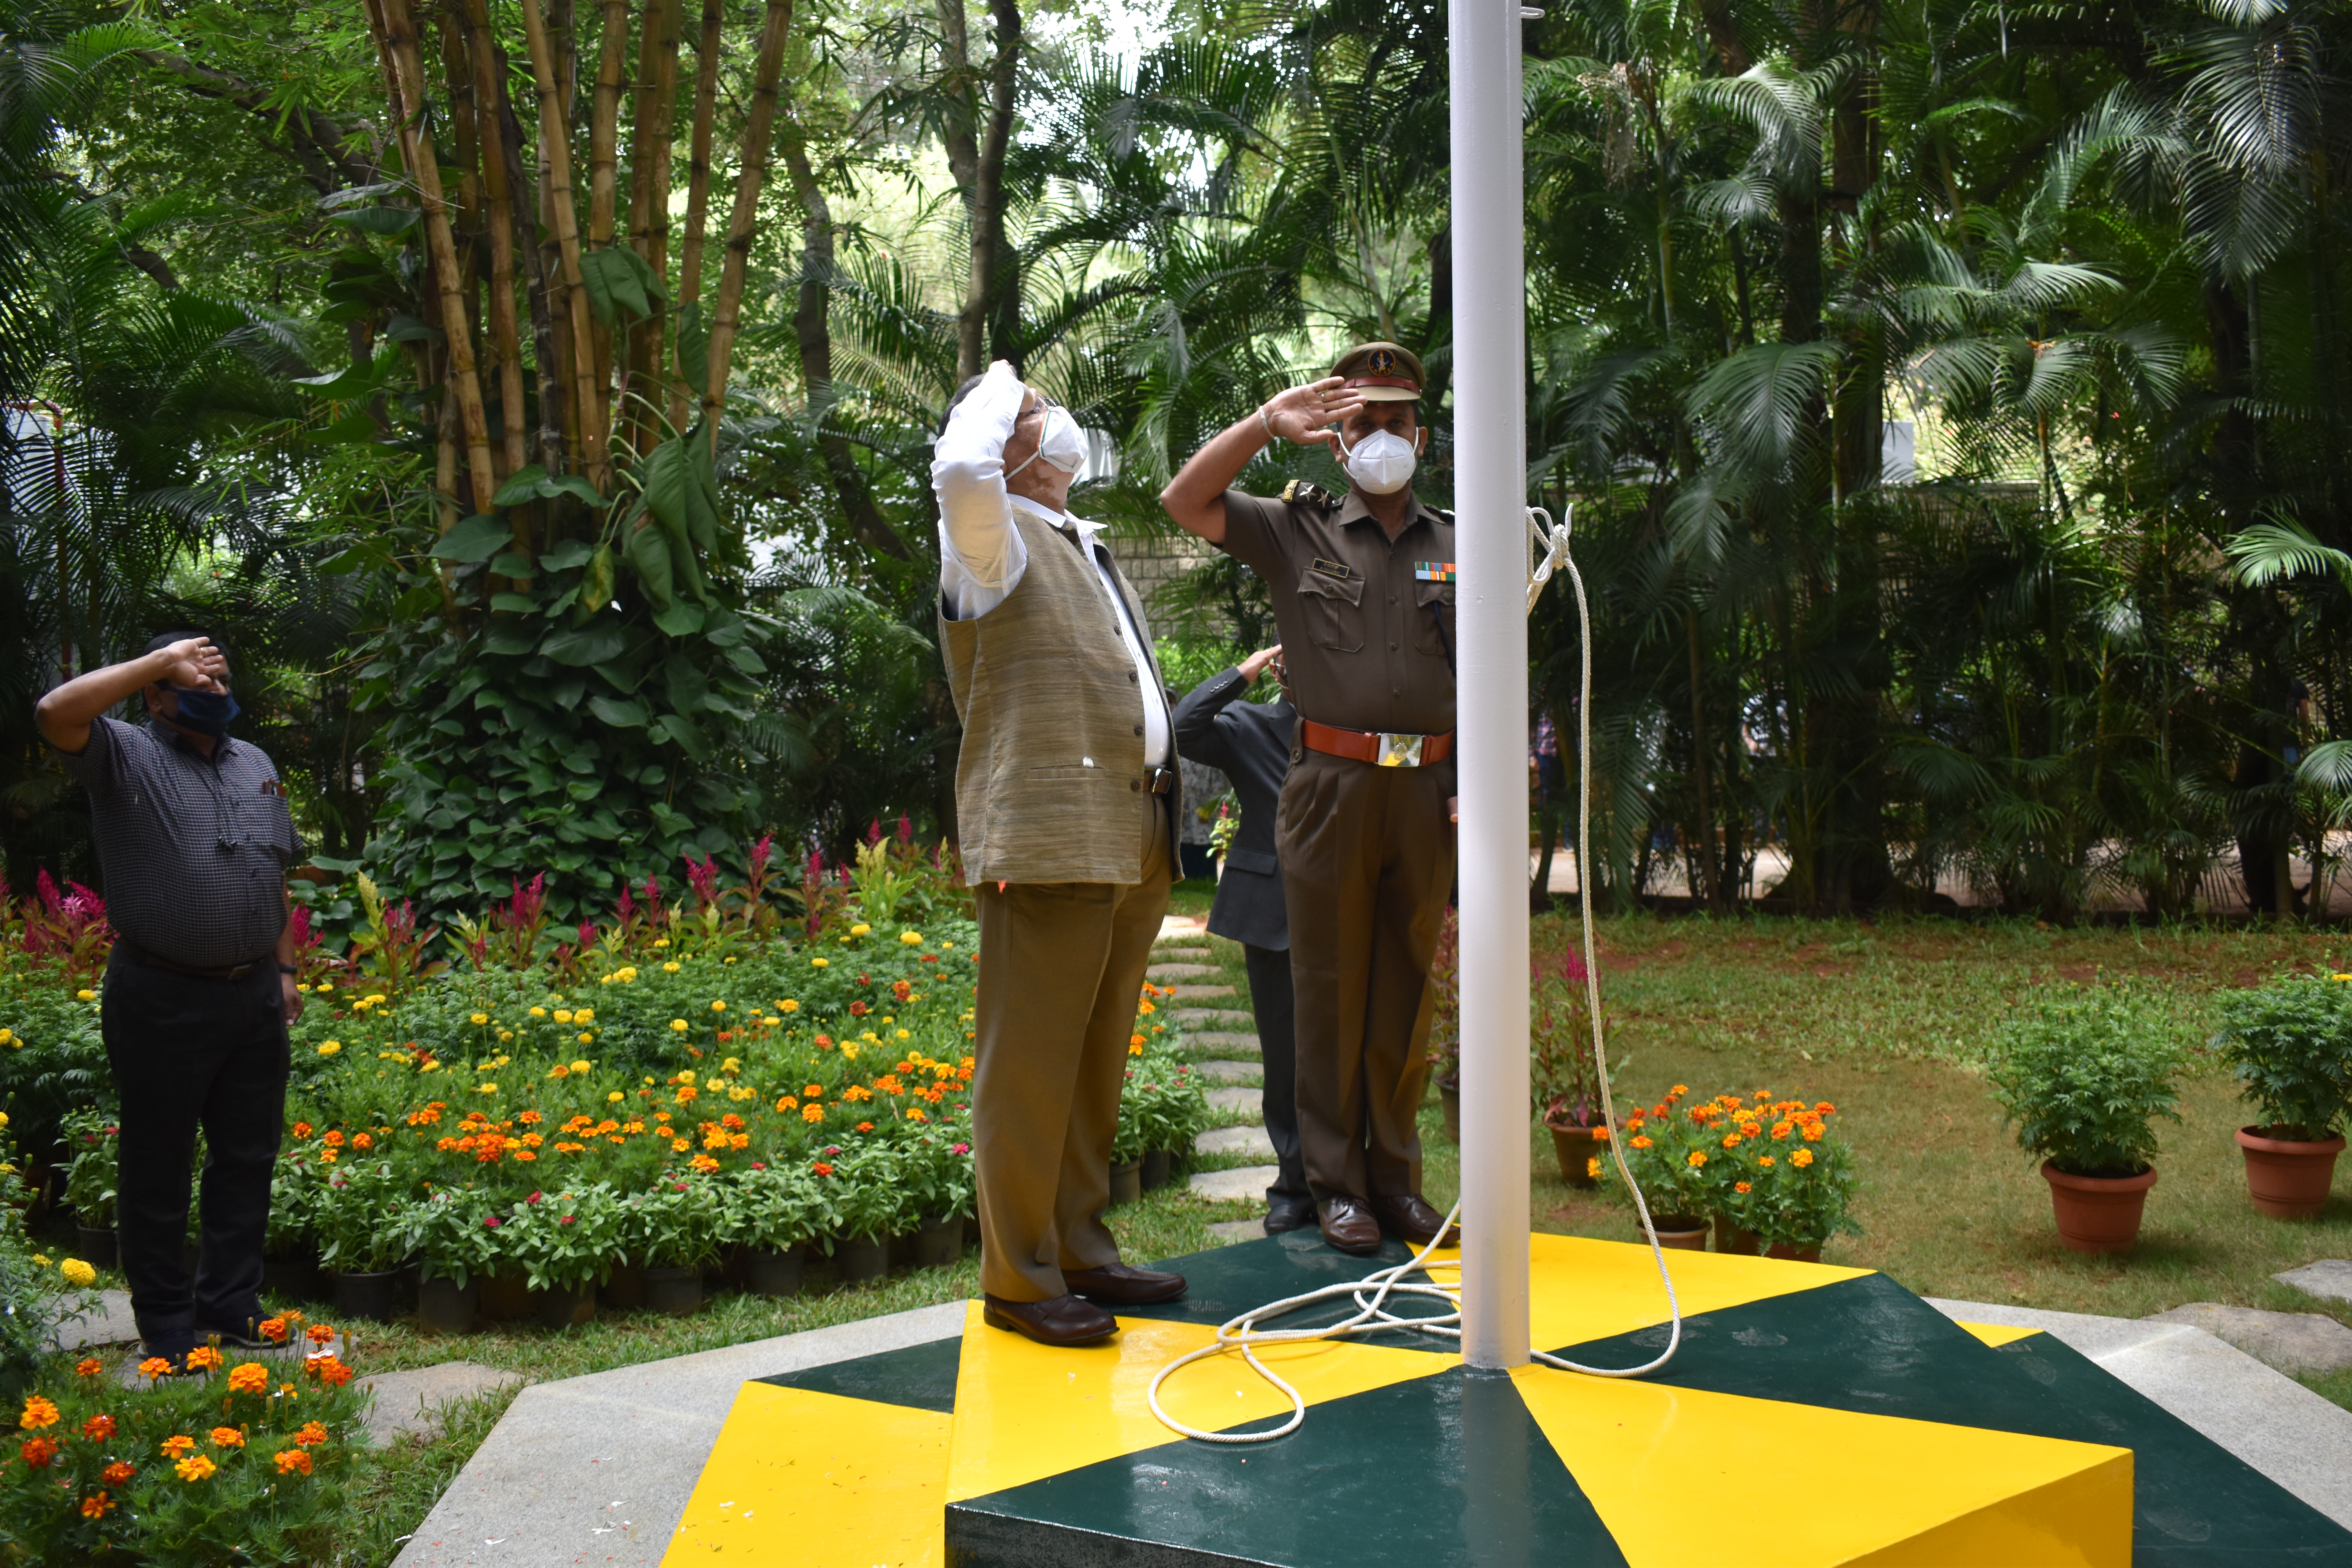 Prof. G. U. Kulkarni, President, JNCASR hoisted the flag in the presence of deans, faculty members, students and staff which was followed by playing of the national anthem. 